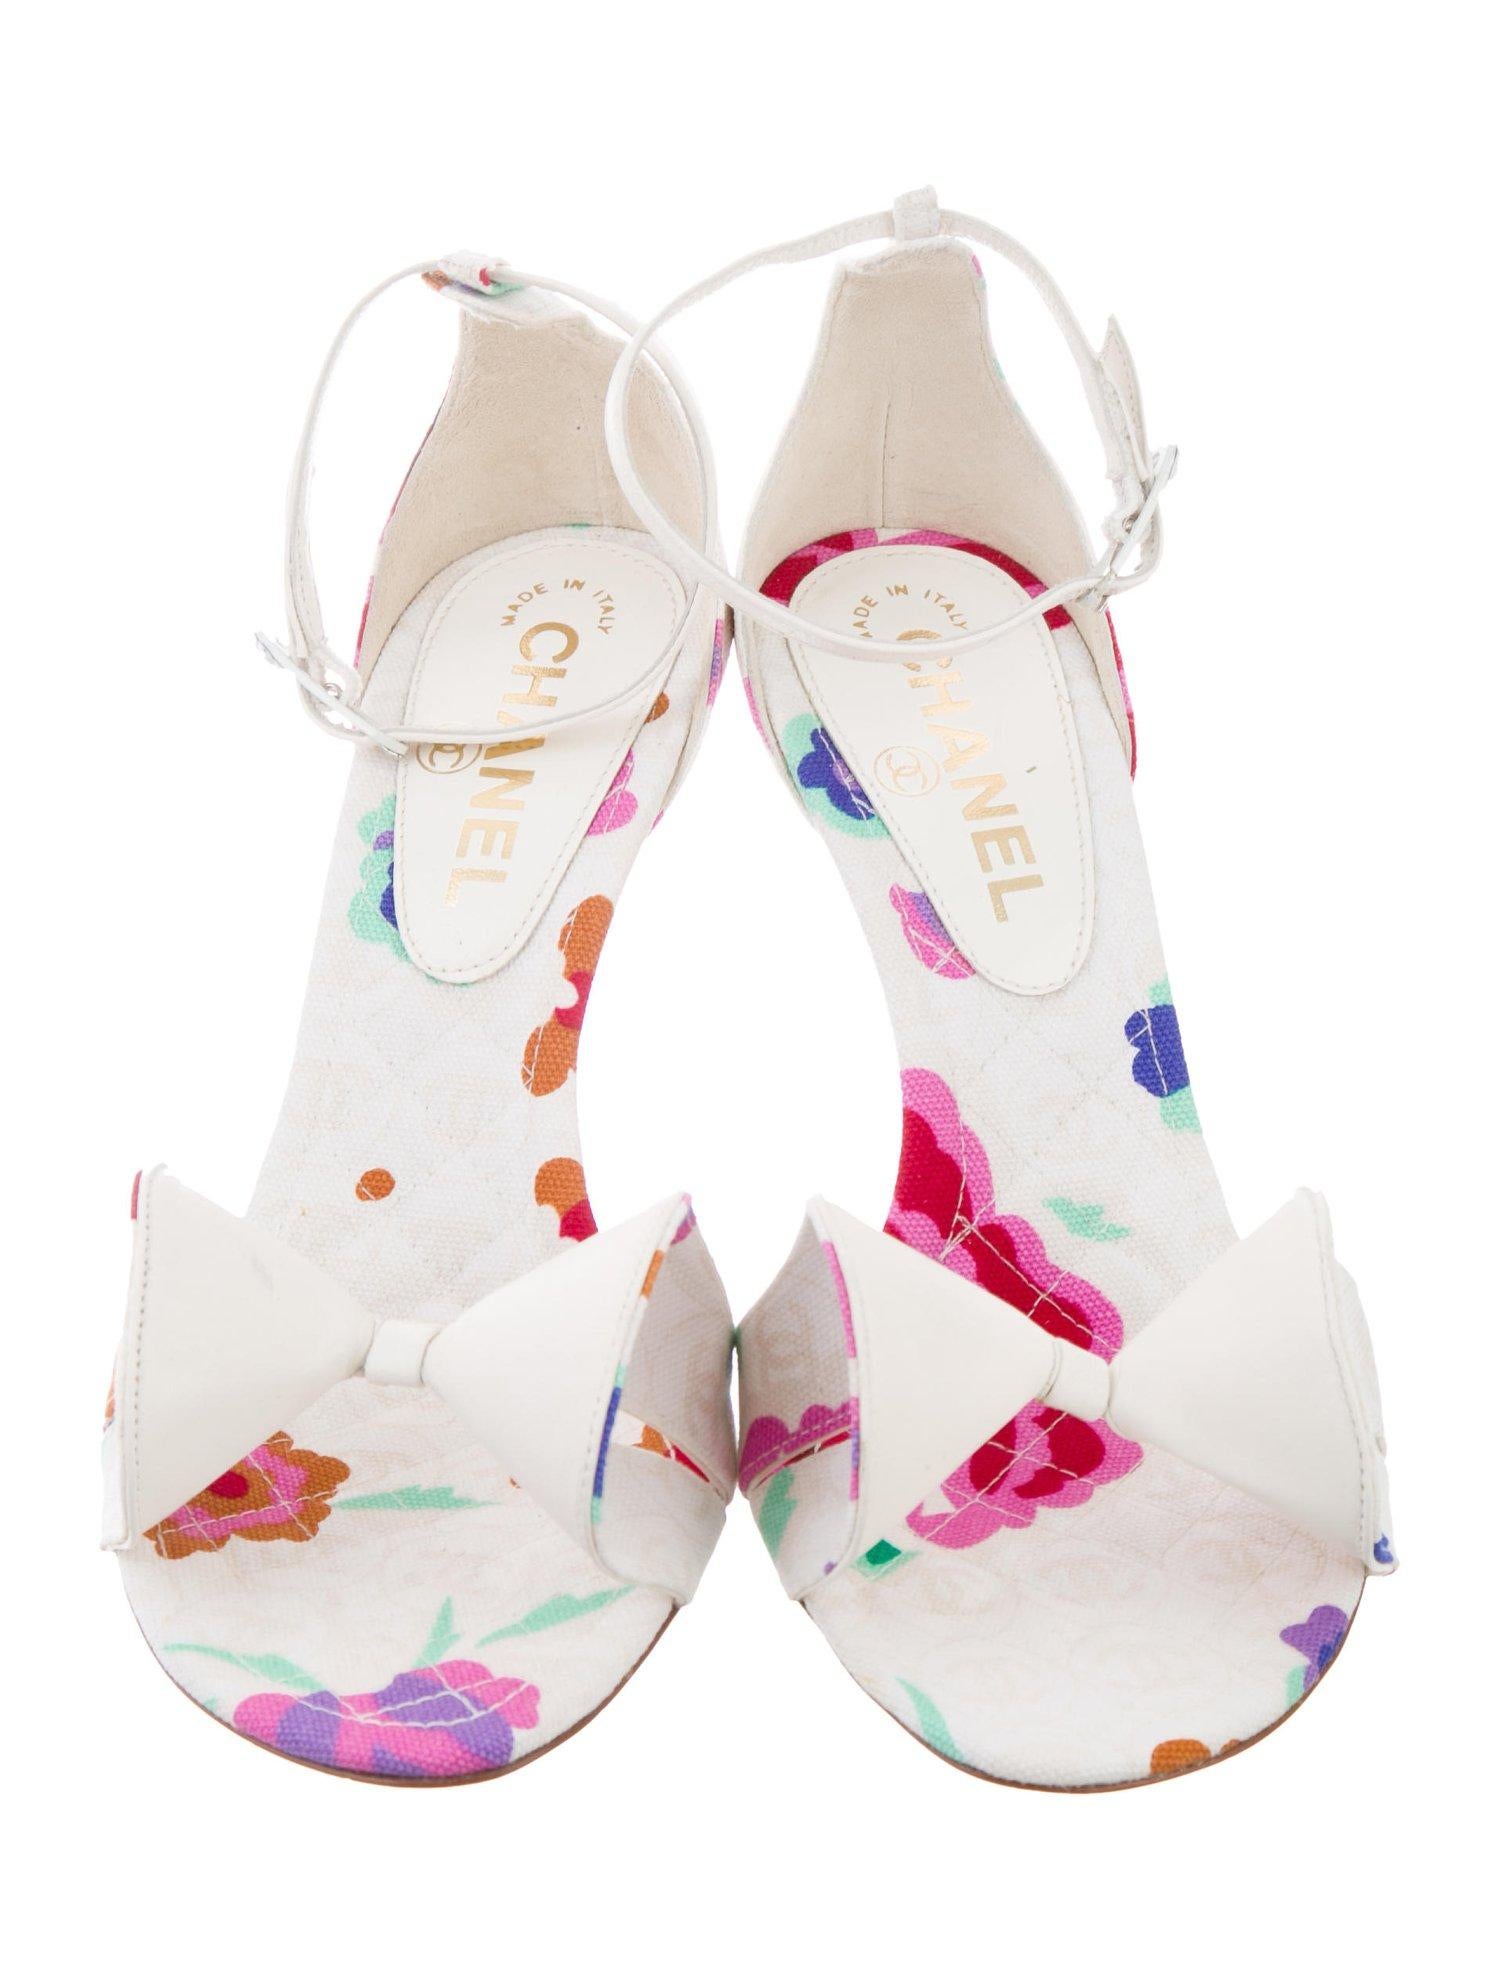 Chanel NEW White Floral Canvas Bow Evening Sandals Heels in Box

Size IT 36
Canvas
Ankle buckle closure
Made in Italy
Heel height 3.25